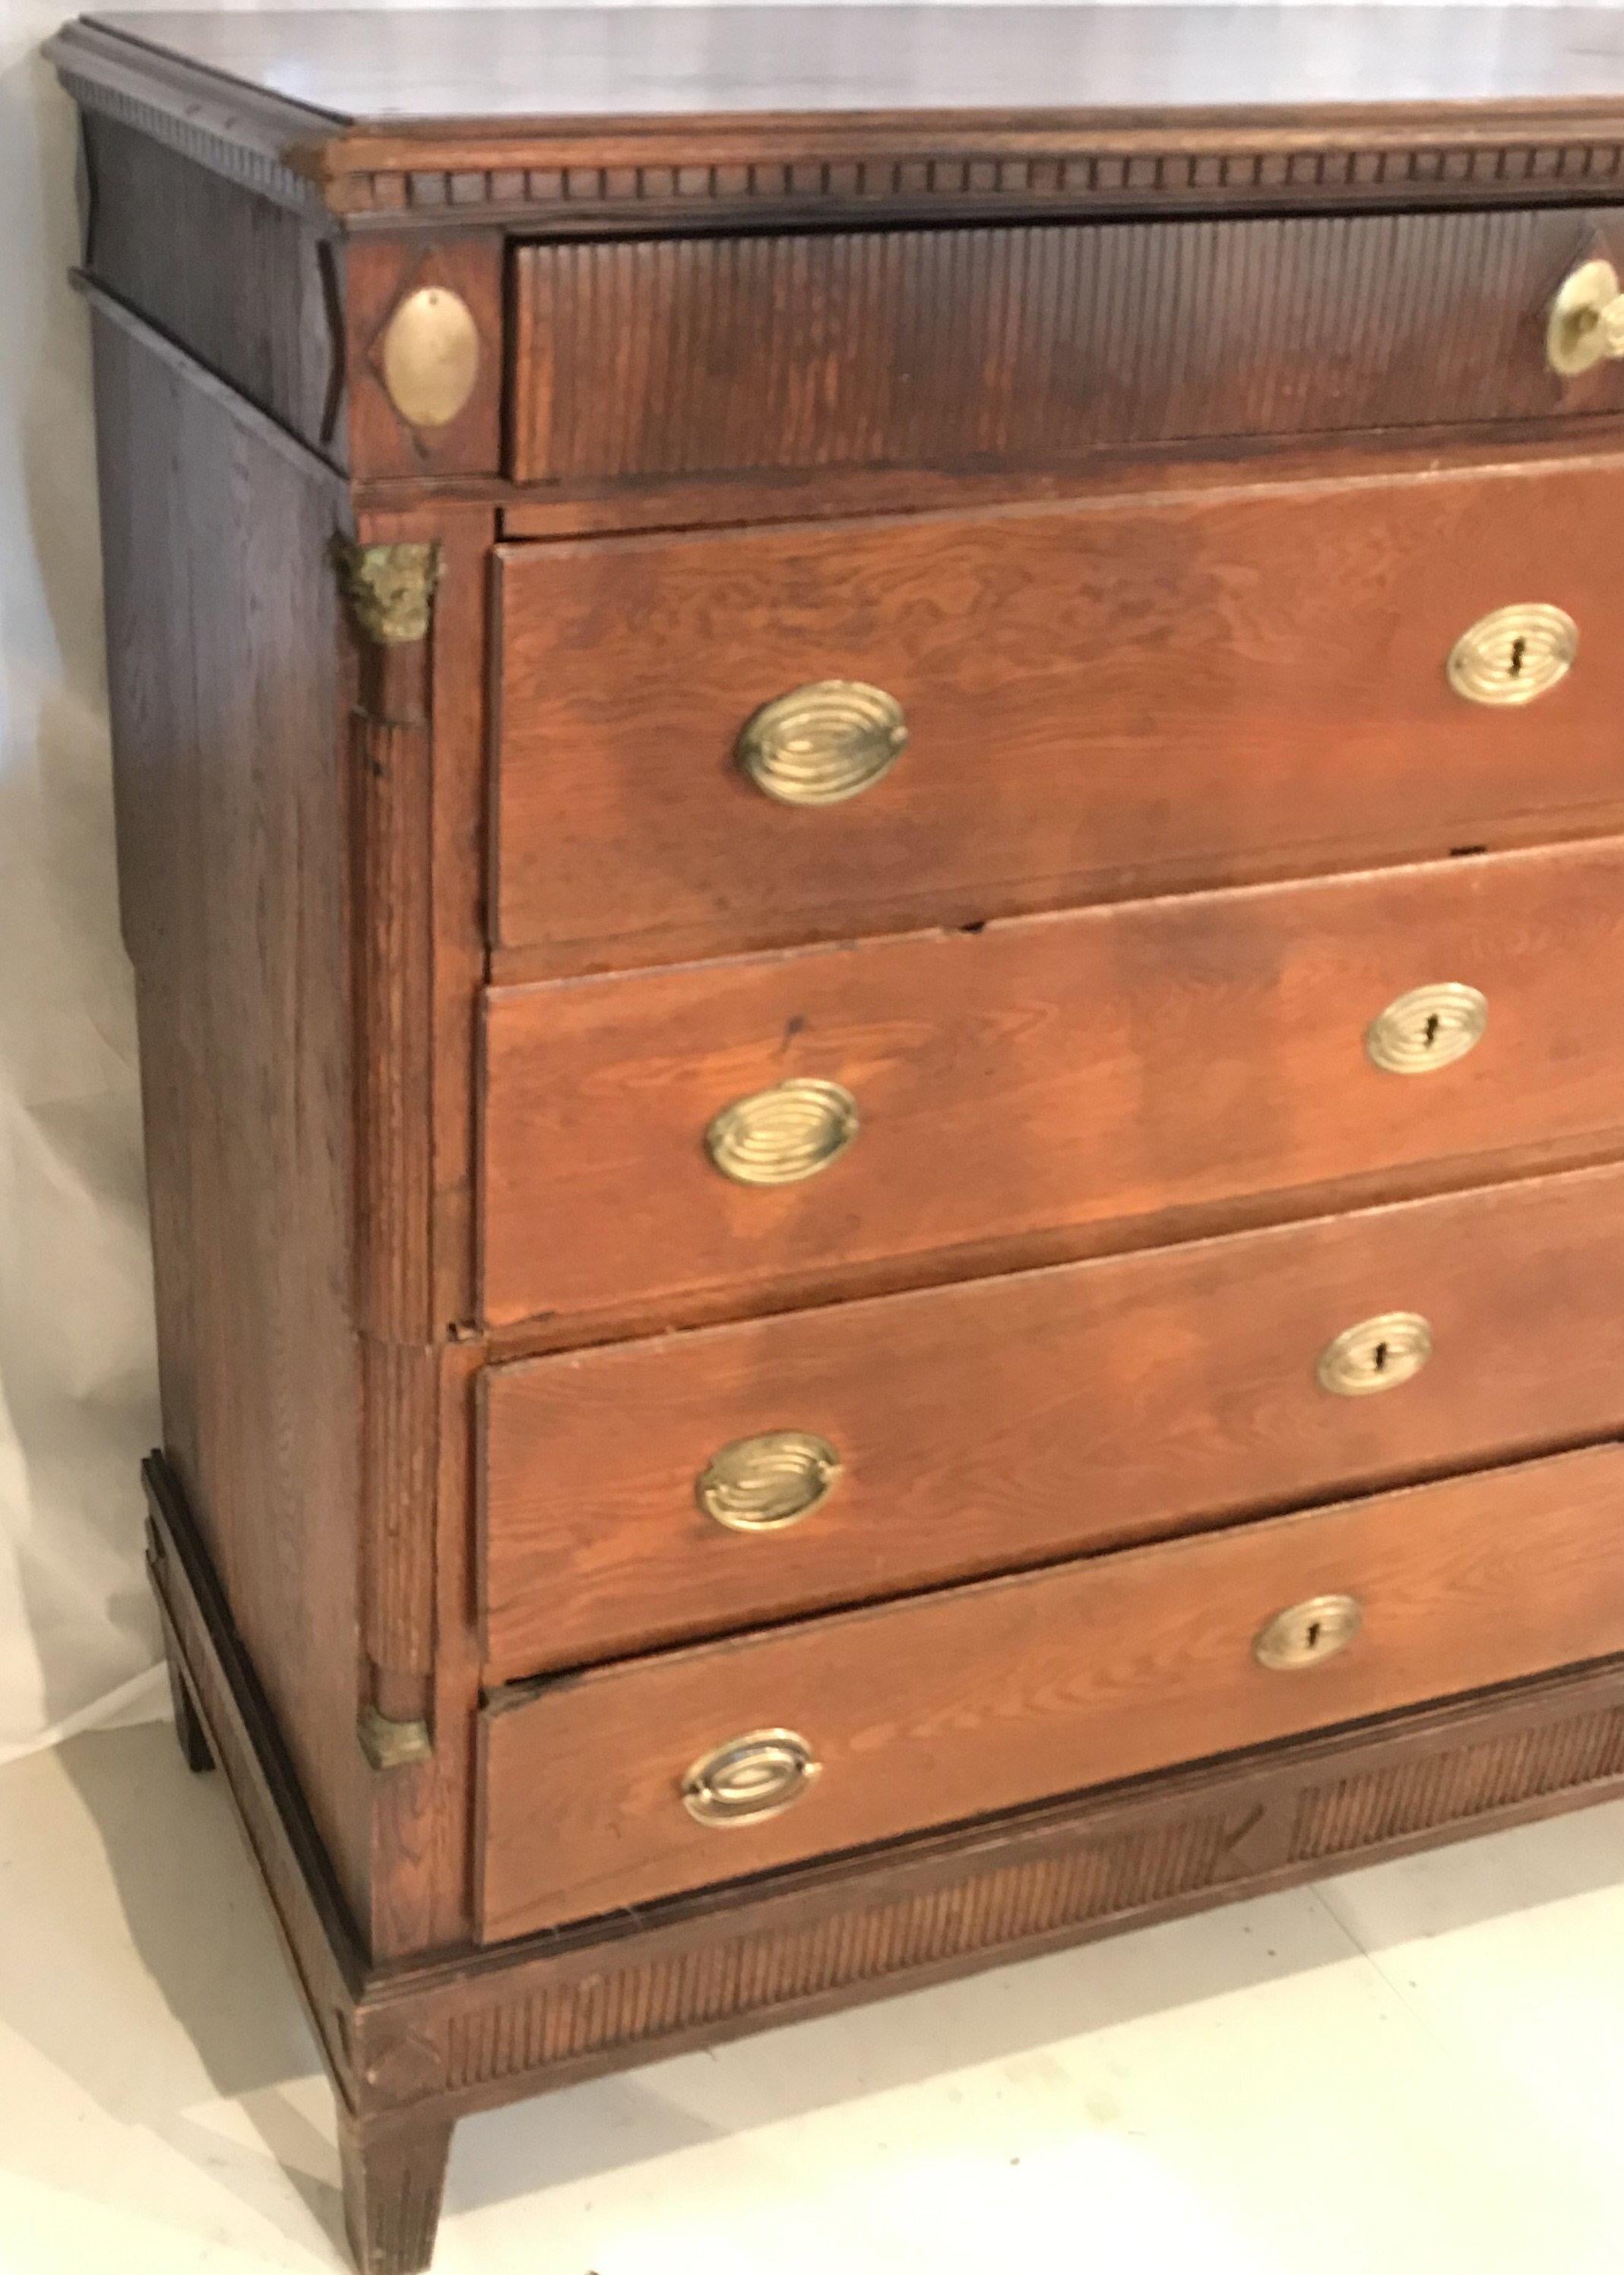 A handsome Campaign style oak commode having beautiful detailing, reeded top drawer and brass ornamented columns in a Classic design. The chest has 4 roomy drawers, and is in two parts so easily moved.
#1990.
   